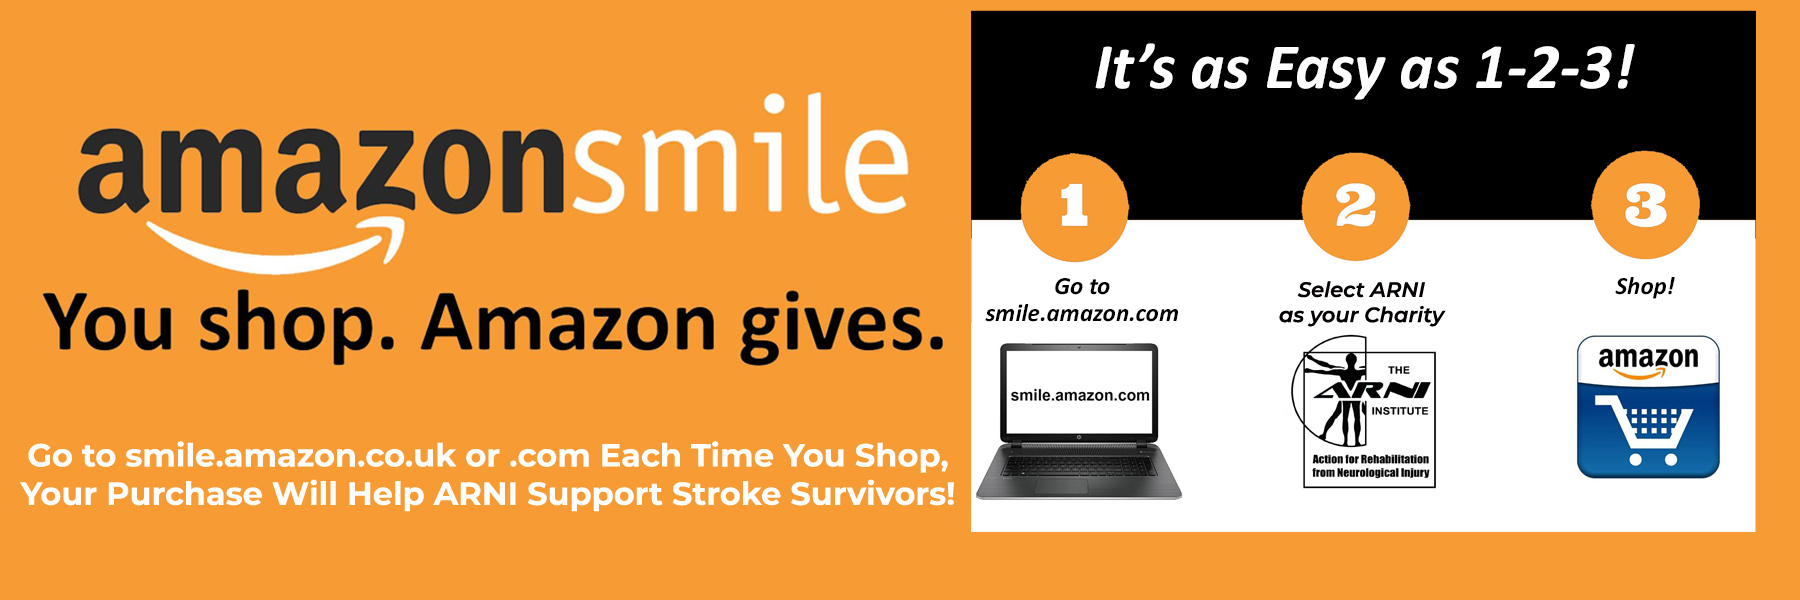 AmazonSmileHomepage2Slideshow copy - DONATE TO STROKE SURVIVORS AT NO EXTRA COST EACH TIME YOU USE AMAZON! - Stroke Rehabilitation and Exercise Training for Survivors & Specialist Stroke Courses for Therapists and Trainers, Online and Face to Face